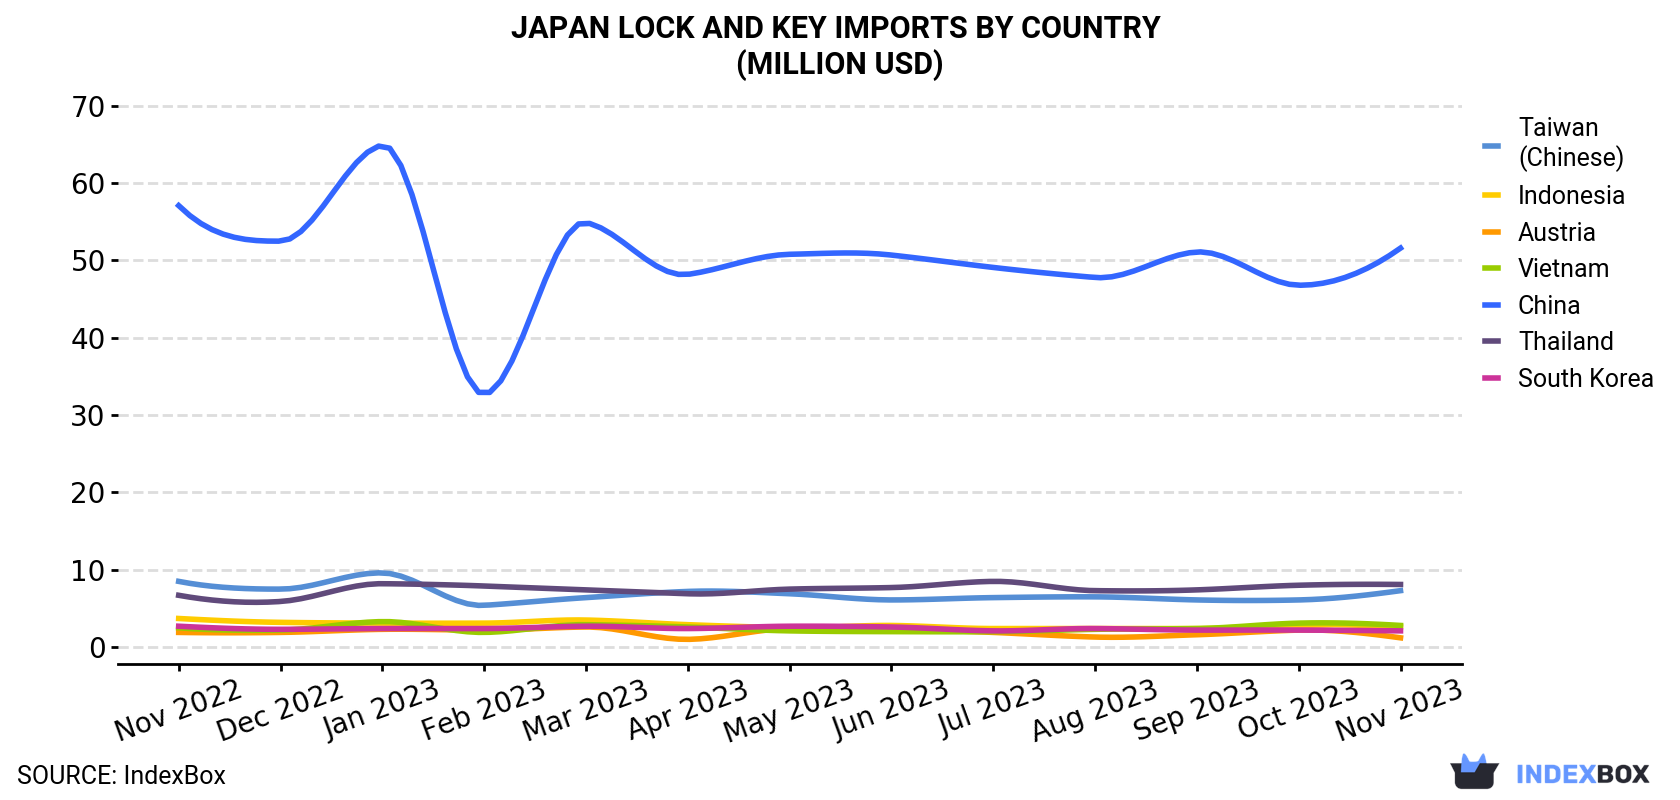 Japan Lock And Key Imports By Country (Million USD)